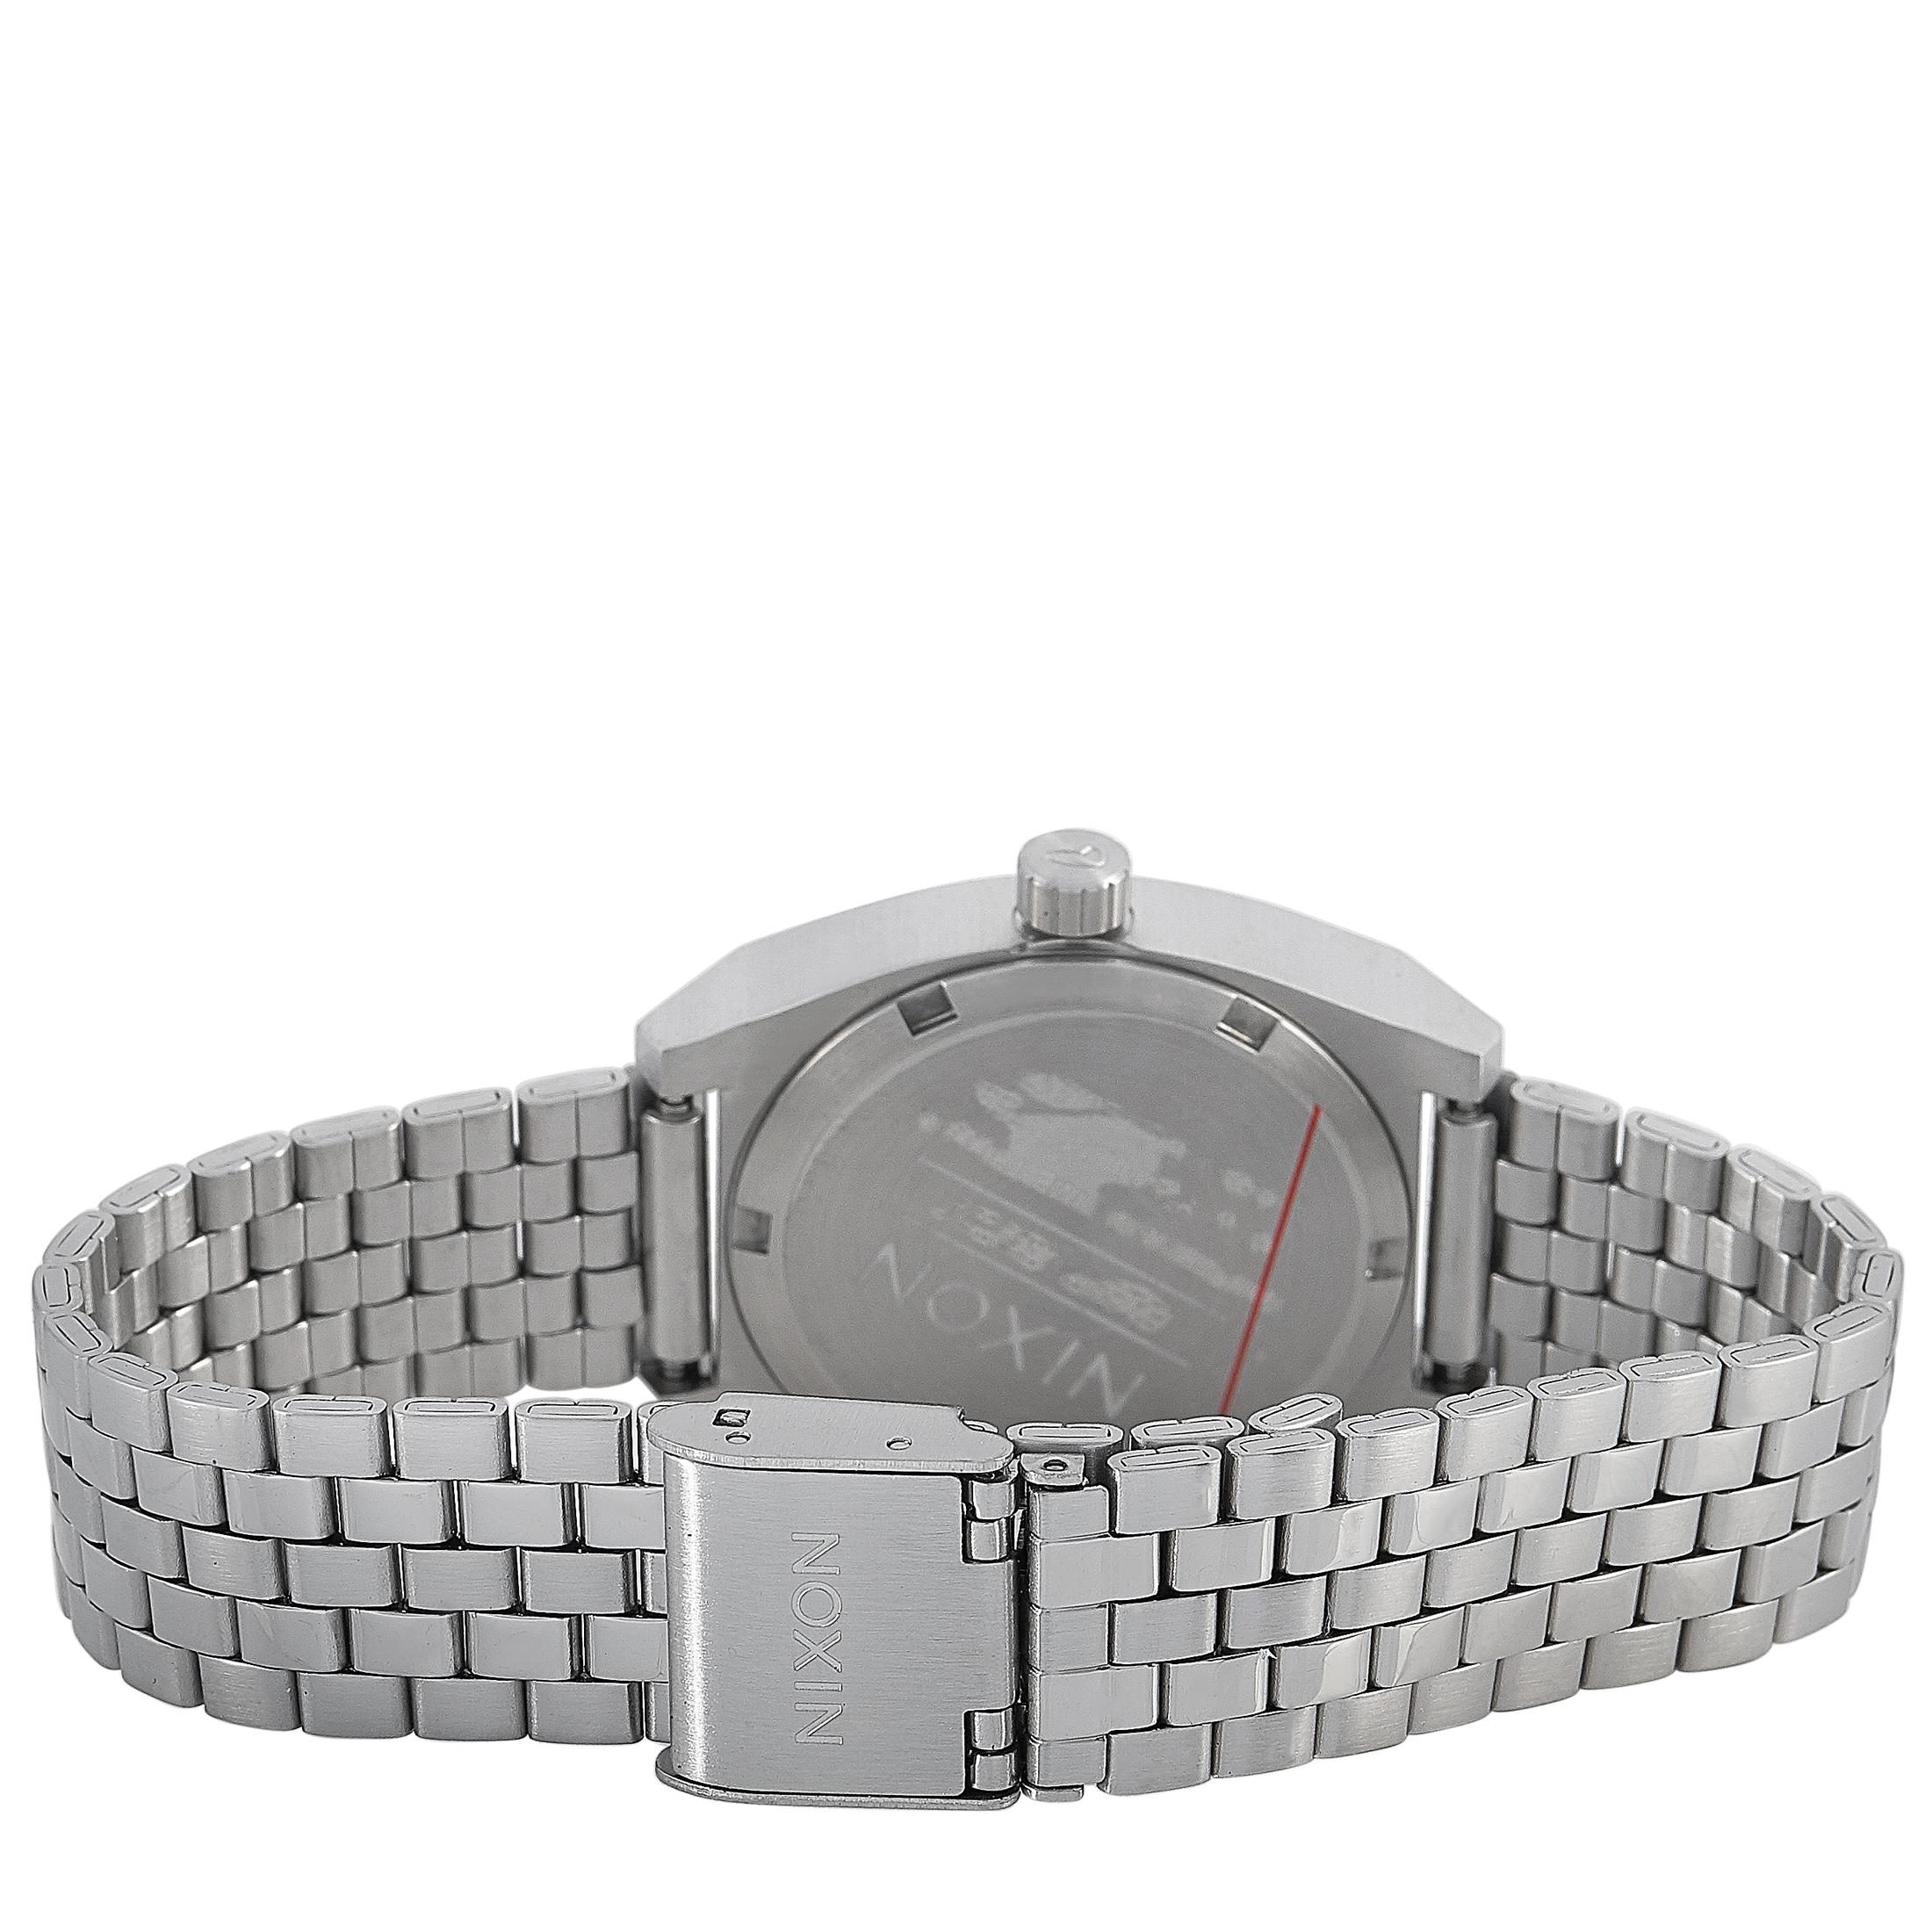 The Nixon Medium Time Teller All Silver watch, reference number A1130-1920-00, comes with a 31 mm stainless steel case that is presented on a matching stainless steel bracelet. The case is water-resistant to 100 meters. The watch is offered with a